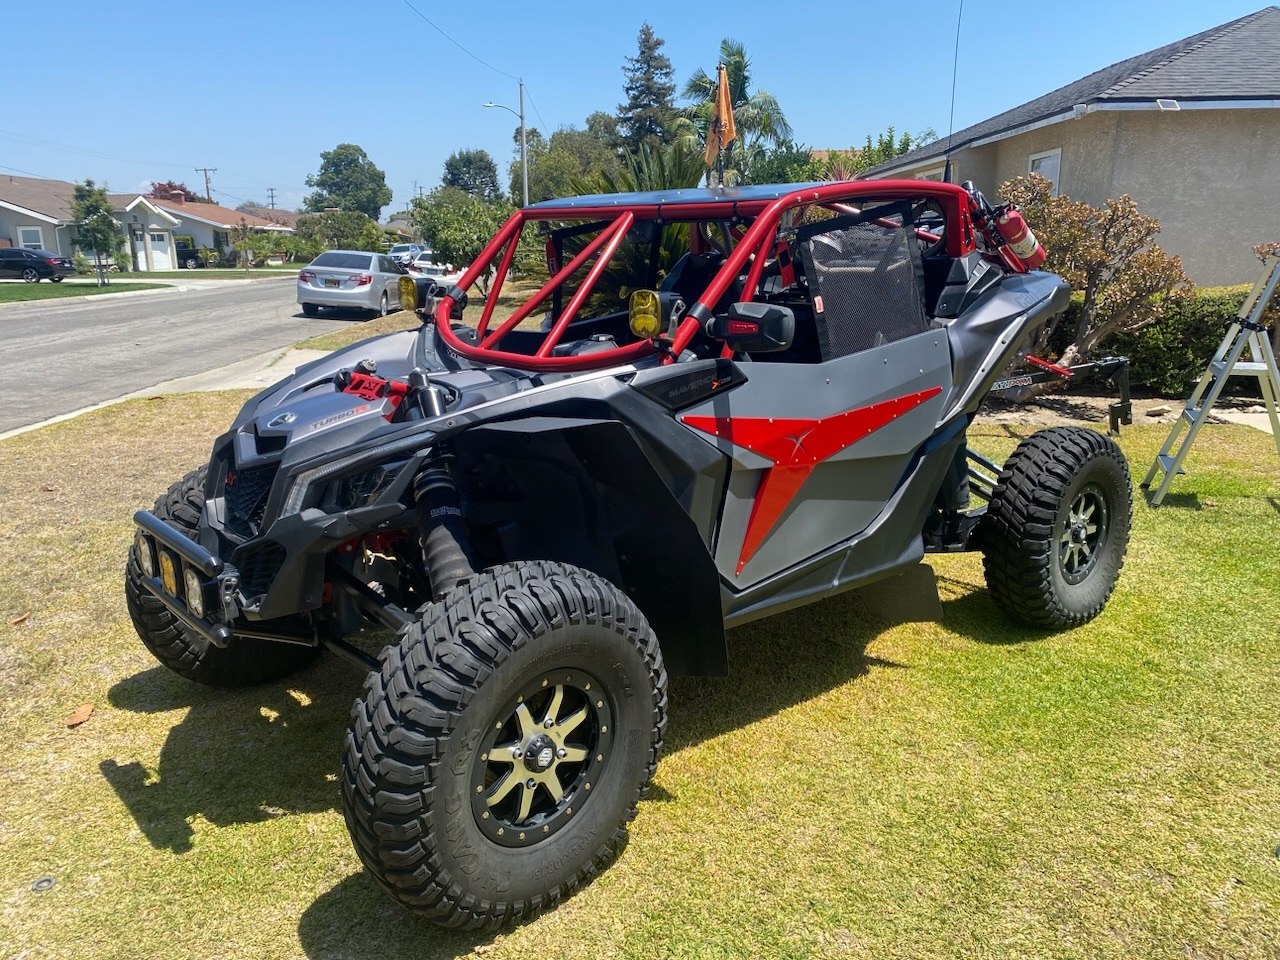 For Sale: Can am x3 xrs 2017 upgraded  - photo2